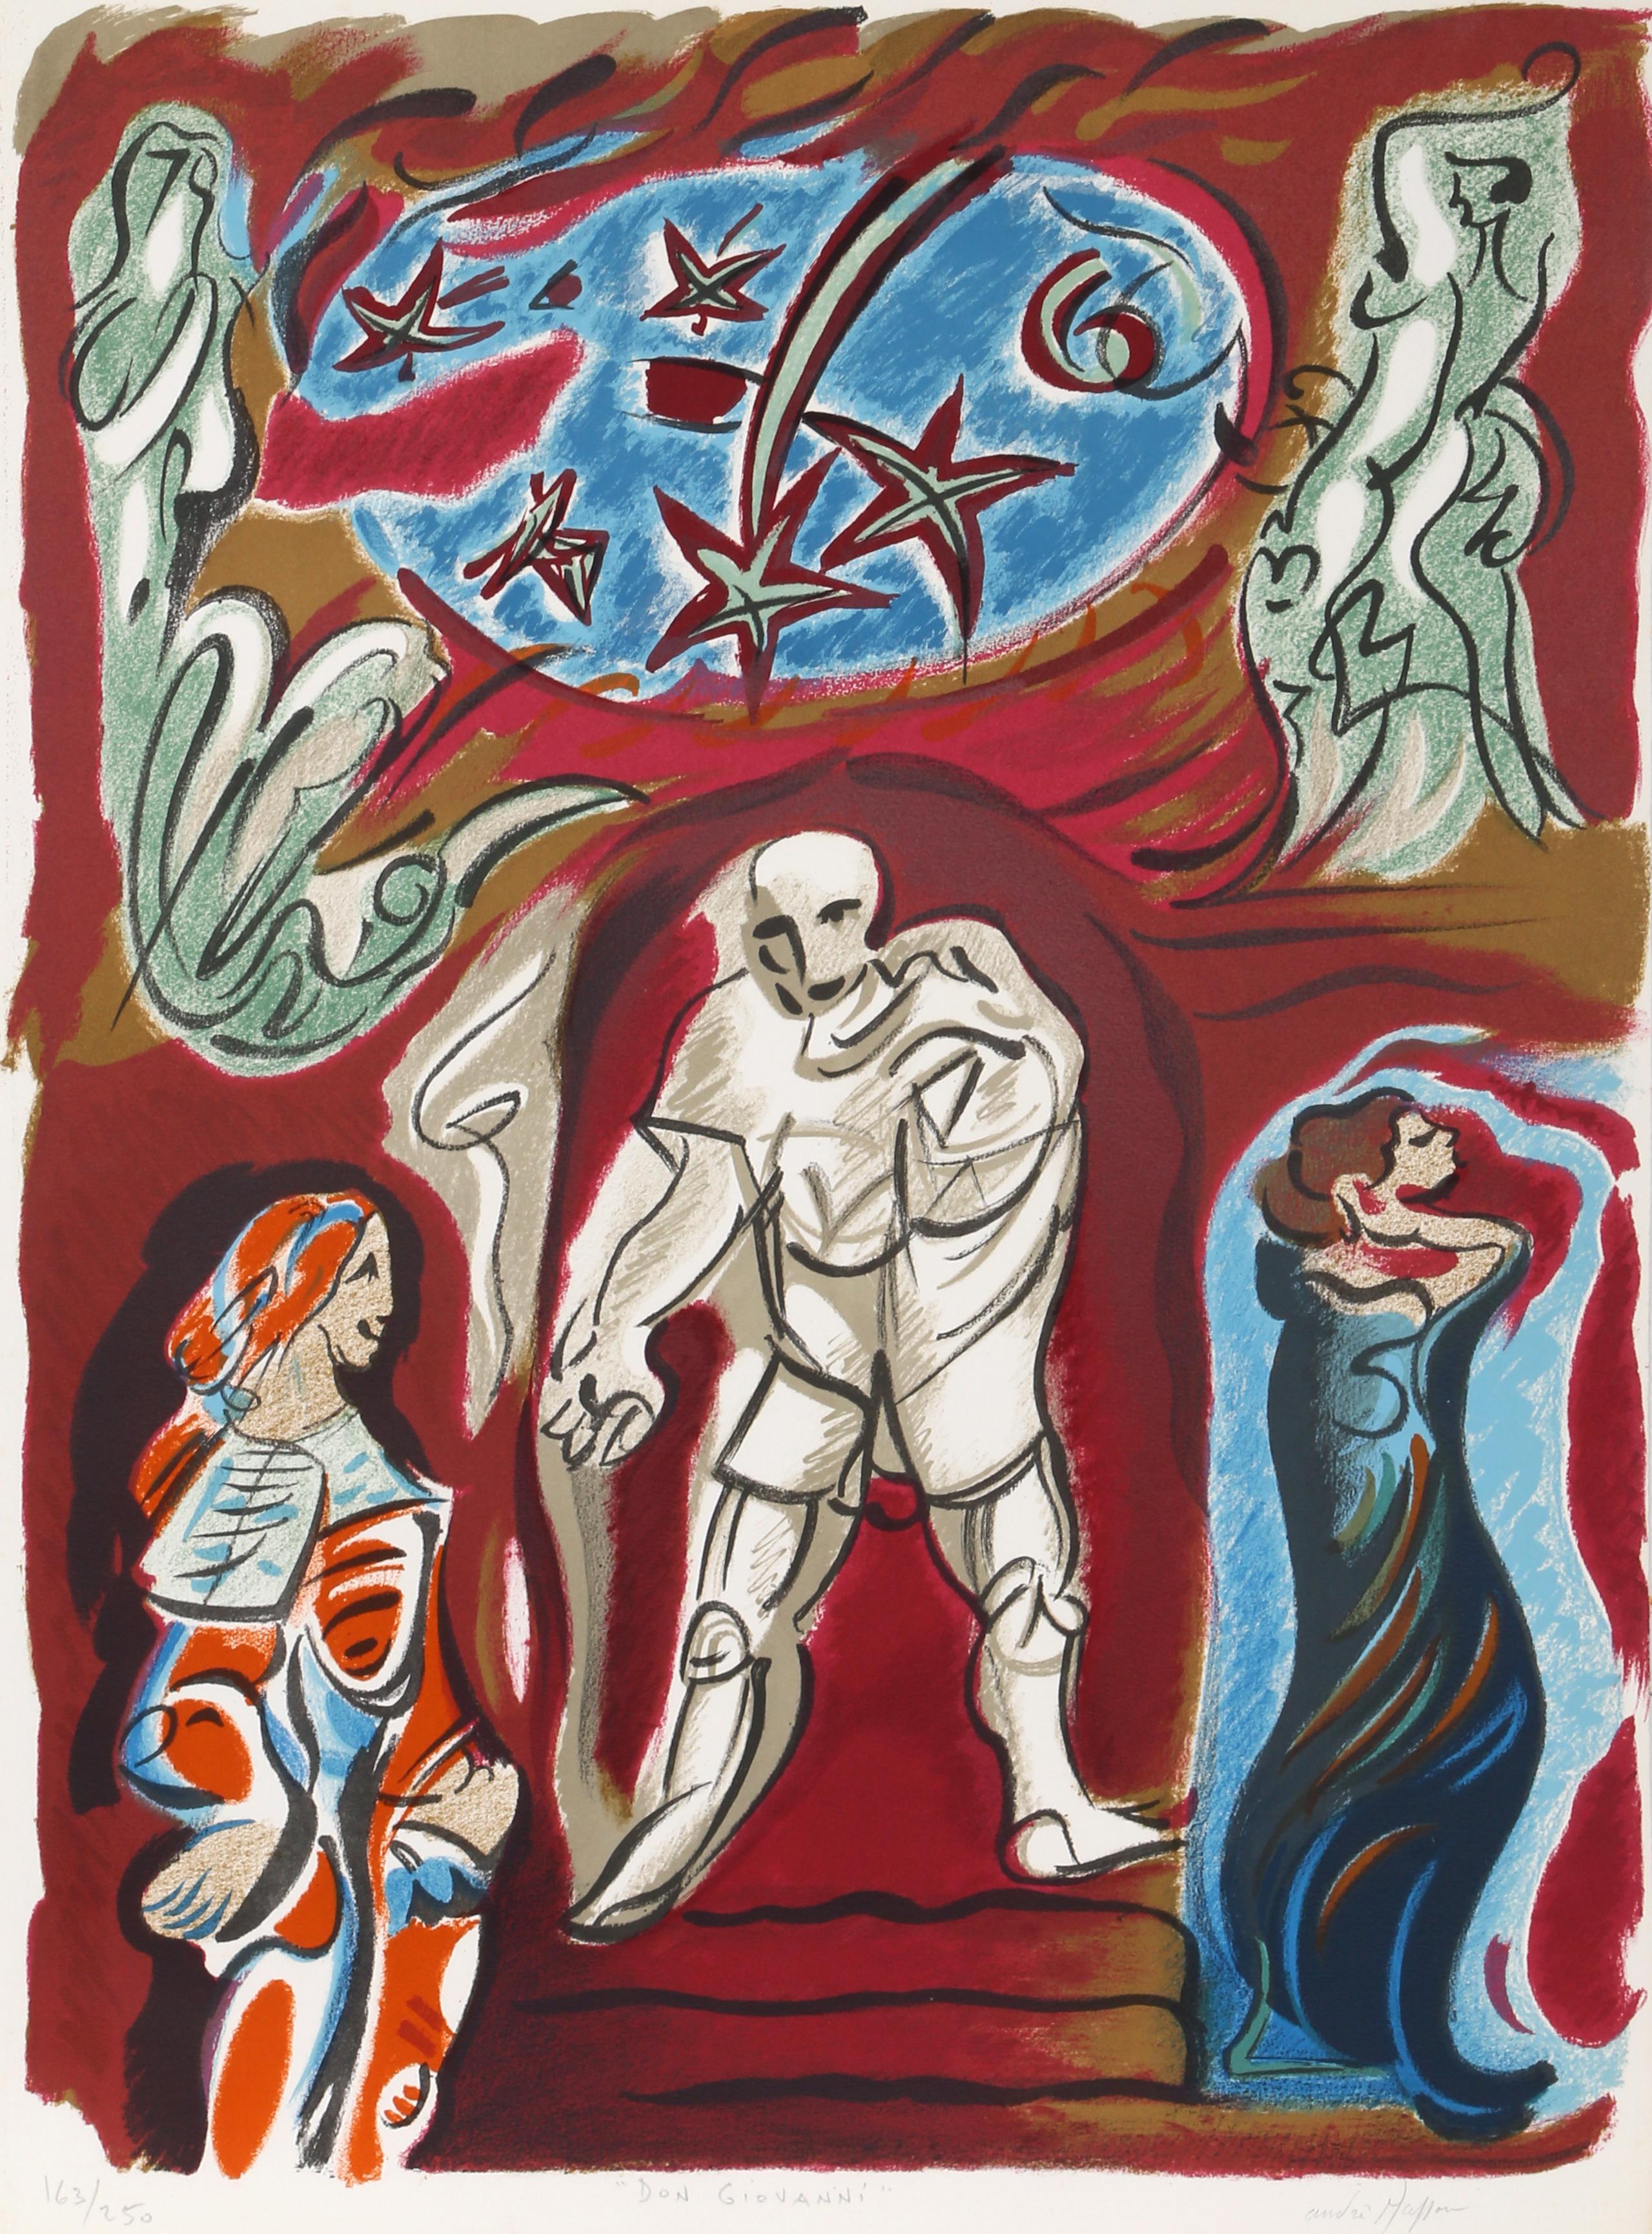 André Masson Figurative Print - Don Giovanni, Surreal Lithograph by Andre Masson